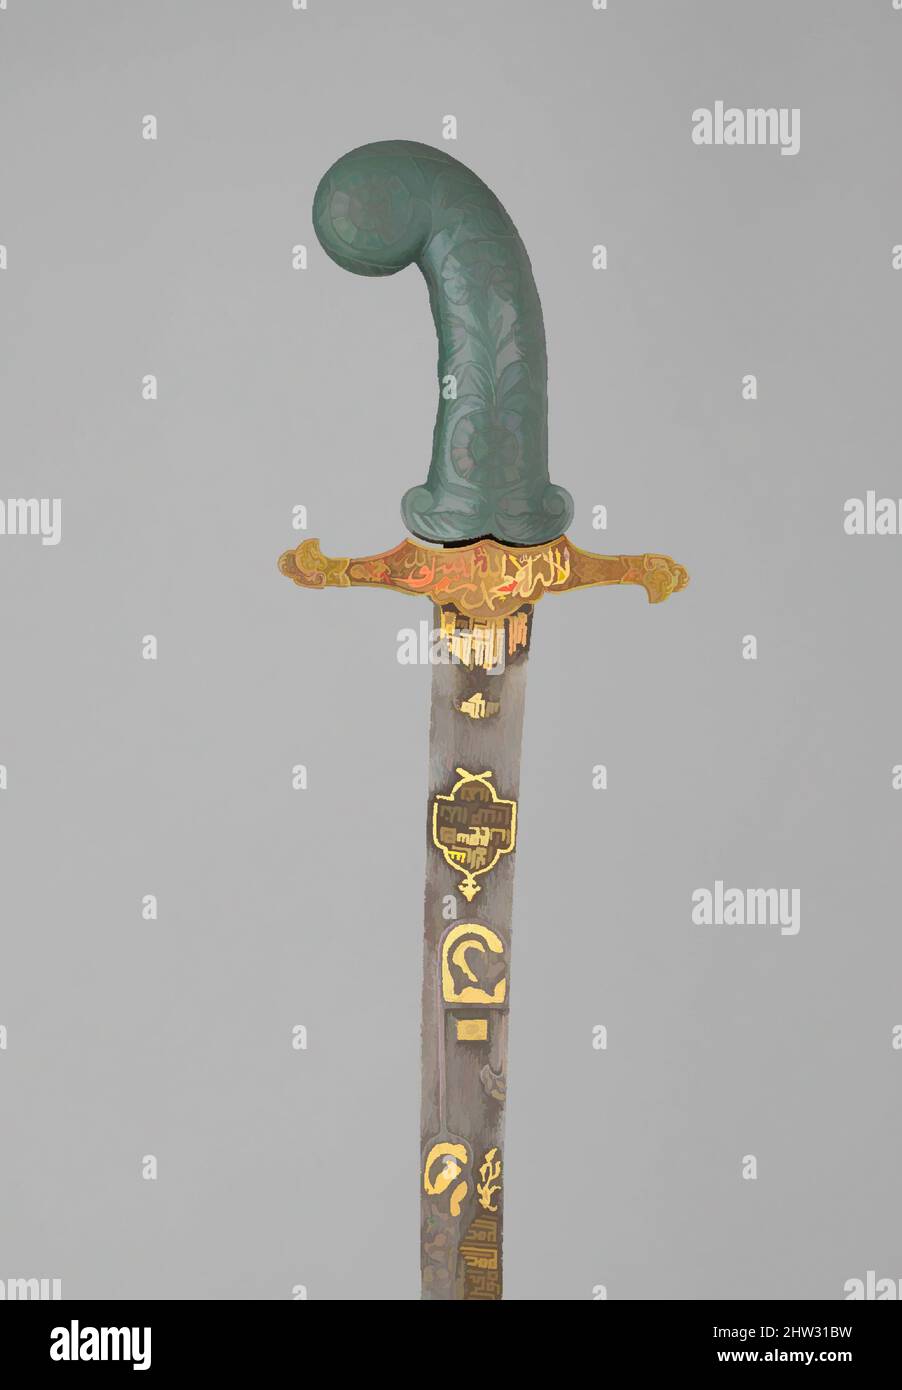 Art inspired by Sword (Kilij), hilt and guard, 19th century; grip, possibly 18th century, hilt and guard, Turkish; grip, Indian, Steel, gold, nephrite, ruby, L. 37 5/8 in. (95.6 cm), Swords, The inscriptions on the sword invokes Allah, the Prophet Muhammad, and ‘Ali. On the sword’s, Classic works modernized by Artotop with a splash of modernity. Shapes, color and value, eye-catching visual impact on art. Emotions through freedom of artworks in a contemporary way. A timeless message pursuing a wildly creative new direction. Artists turning to the digital medium and creating the Artotop NFT Stock Photo